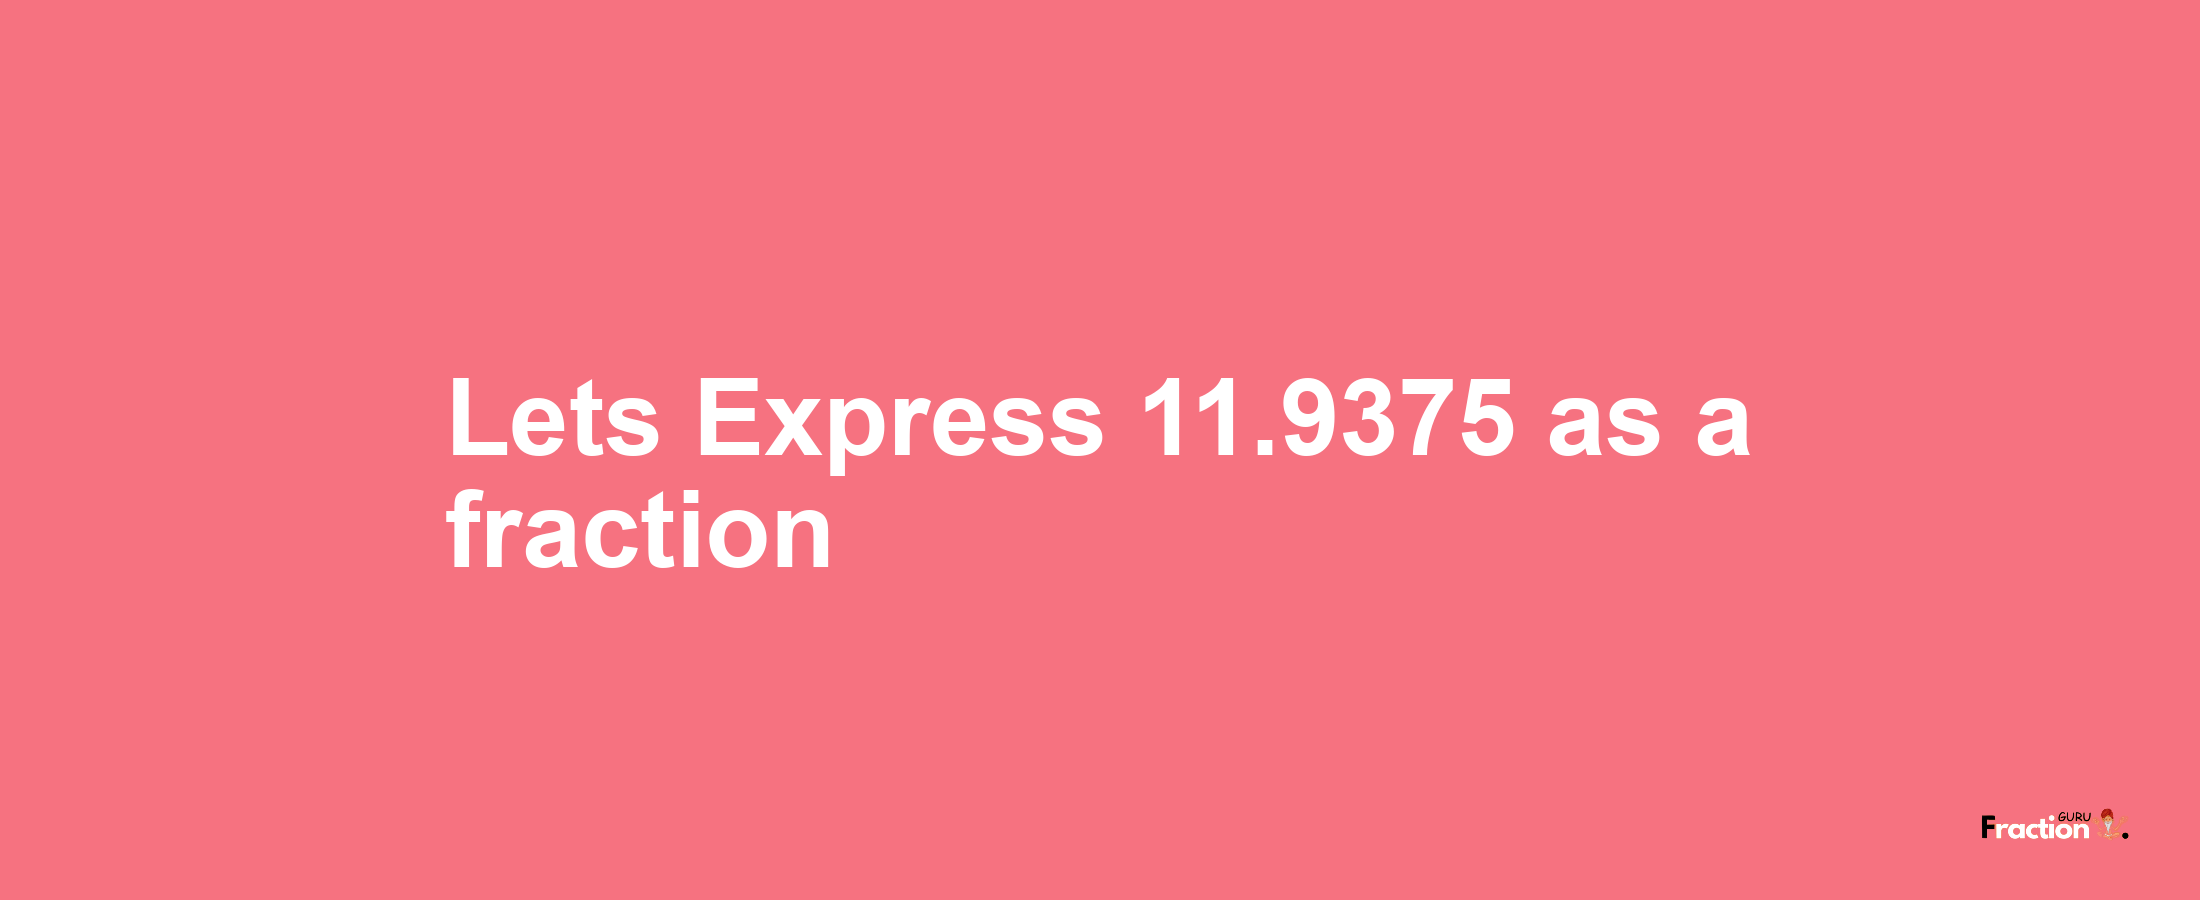 Lets Express 11.9375 as afraction